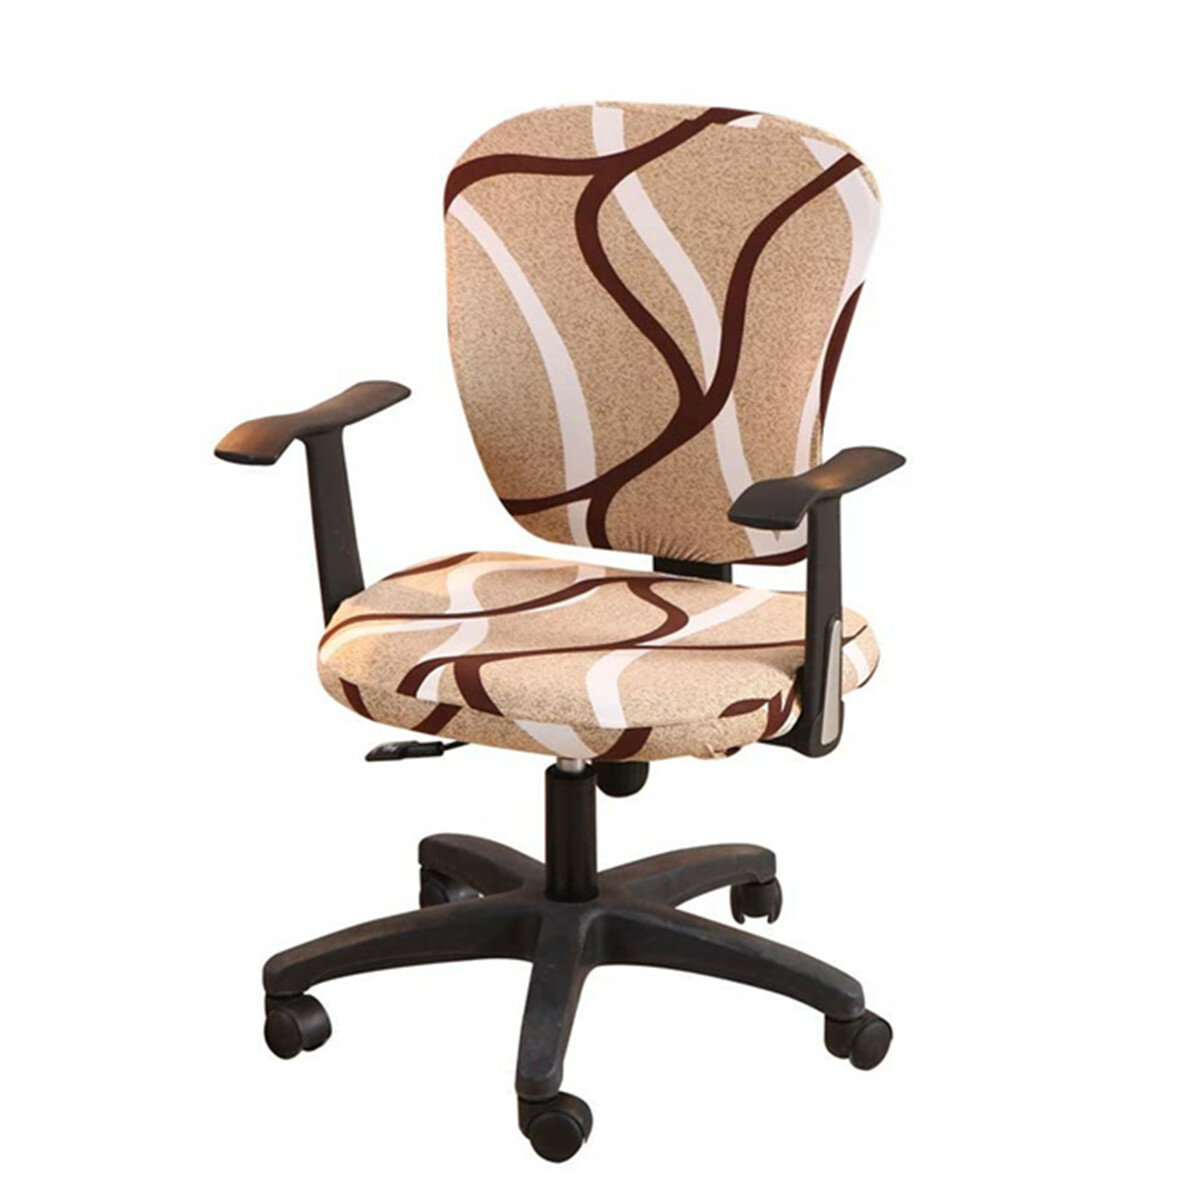 

2Pcs/set Office Chair Cover Elastic Computer Rotating Chair Protector Stretch Arm Chair Seat Slipcover Home Office Furni